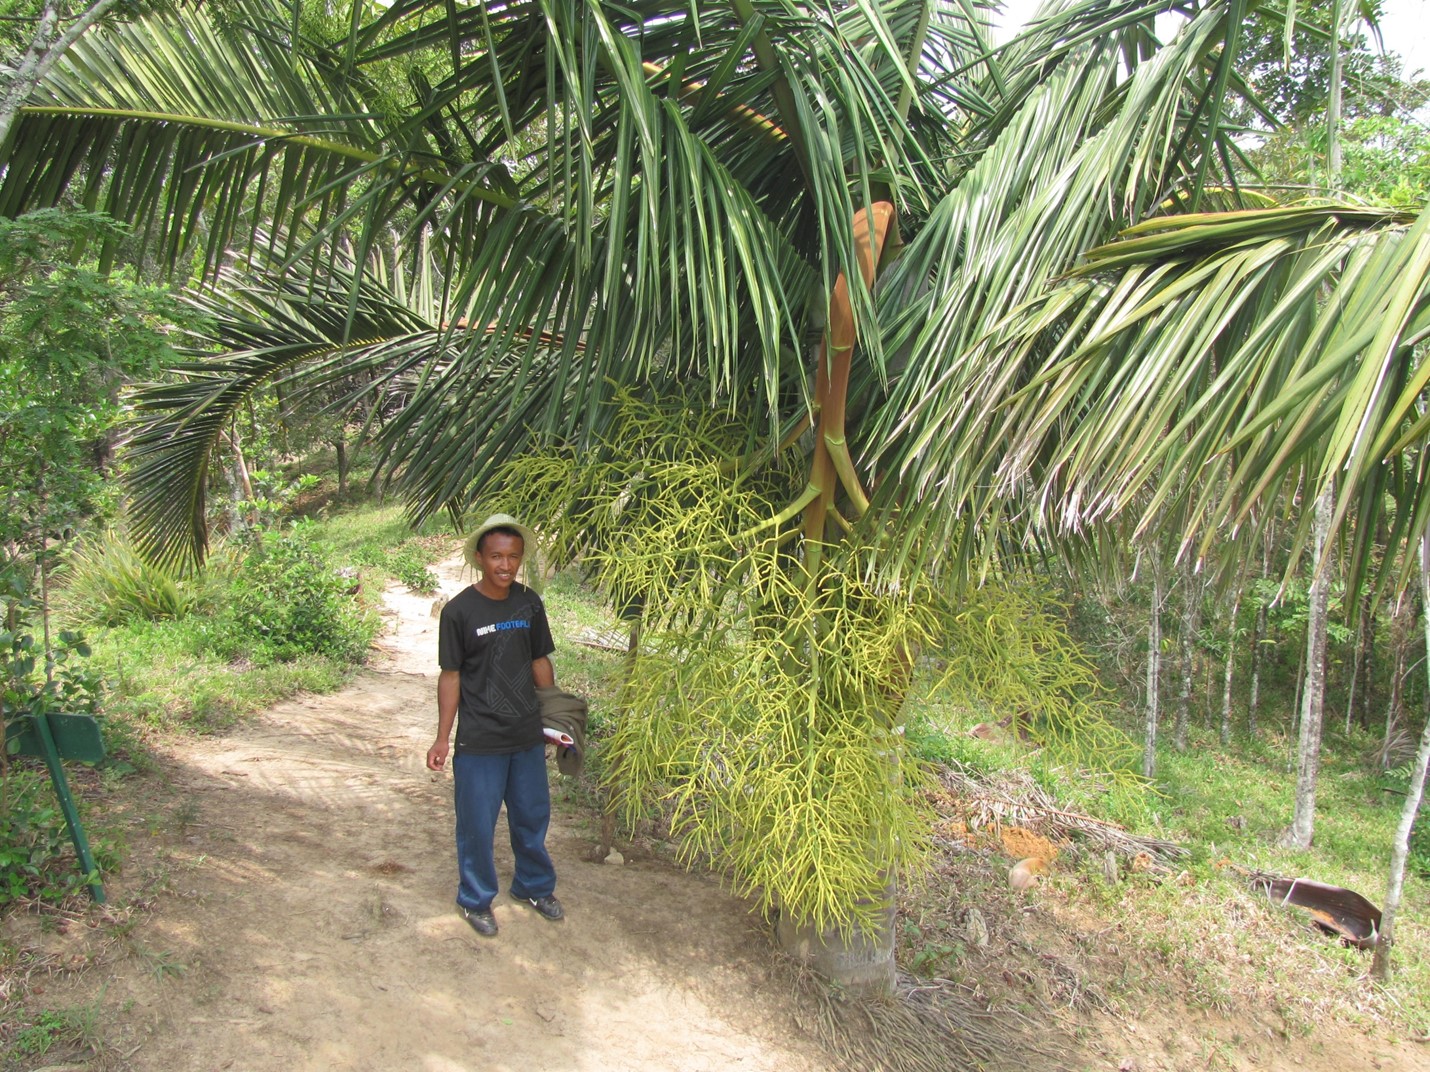 Dypsis robusta: known from only 1 mature individual in the wild; Germain Andrianaivoson at left